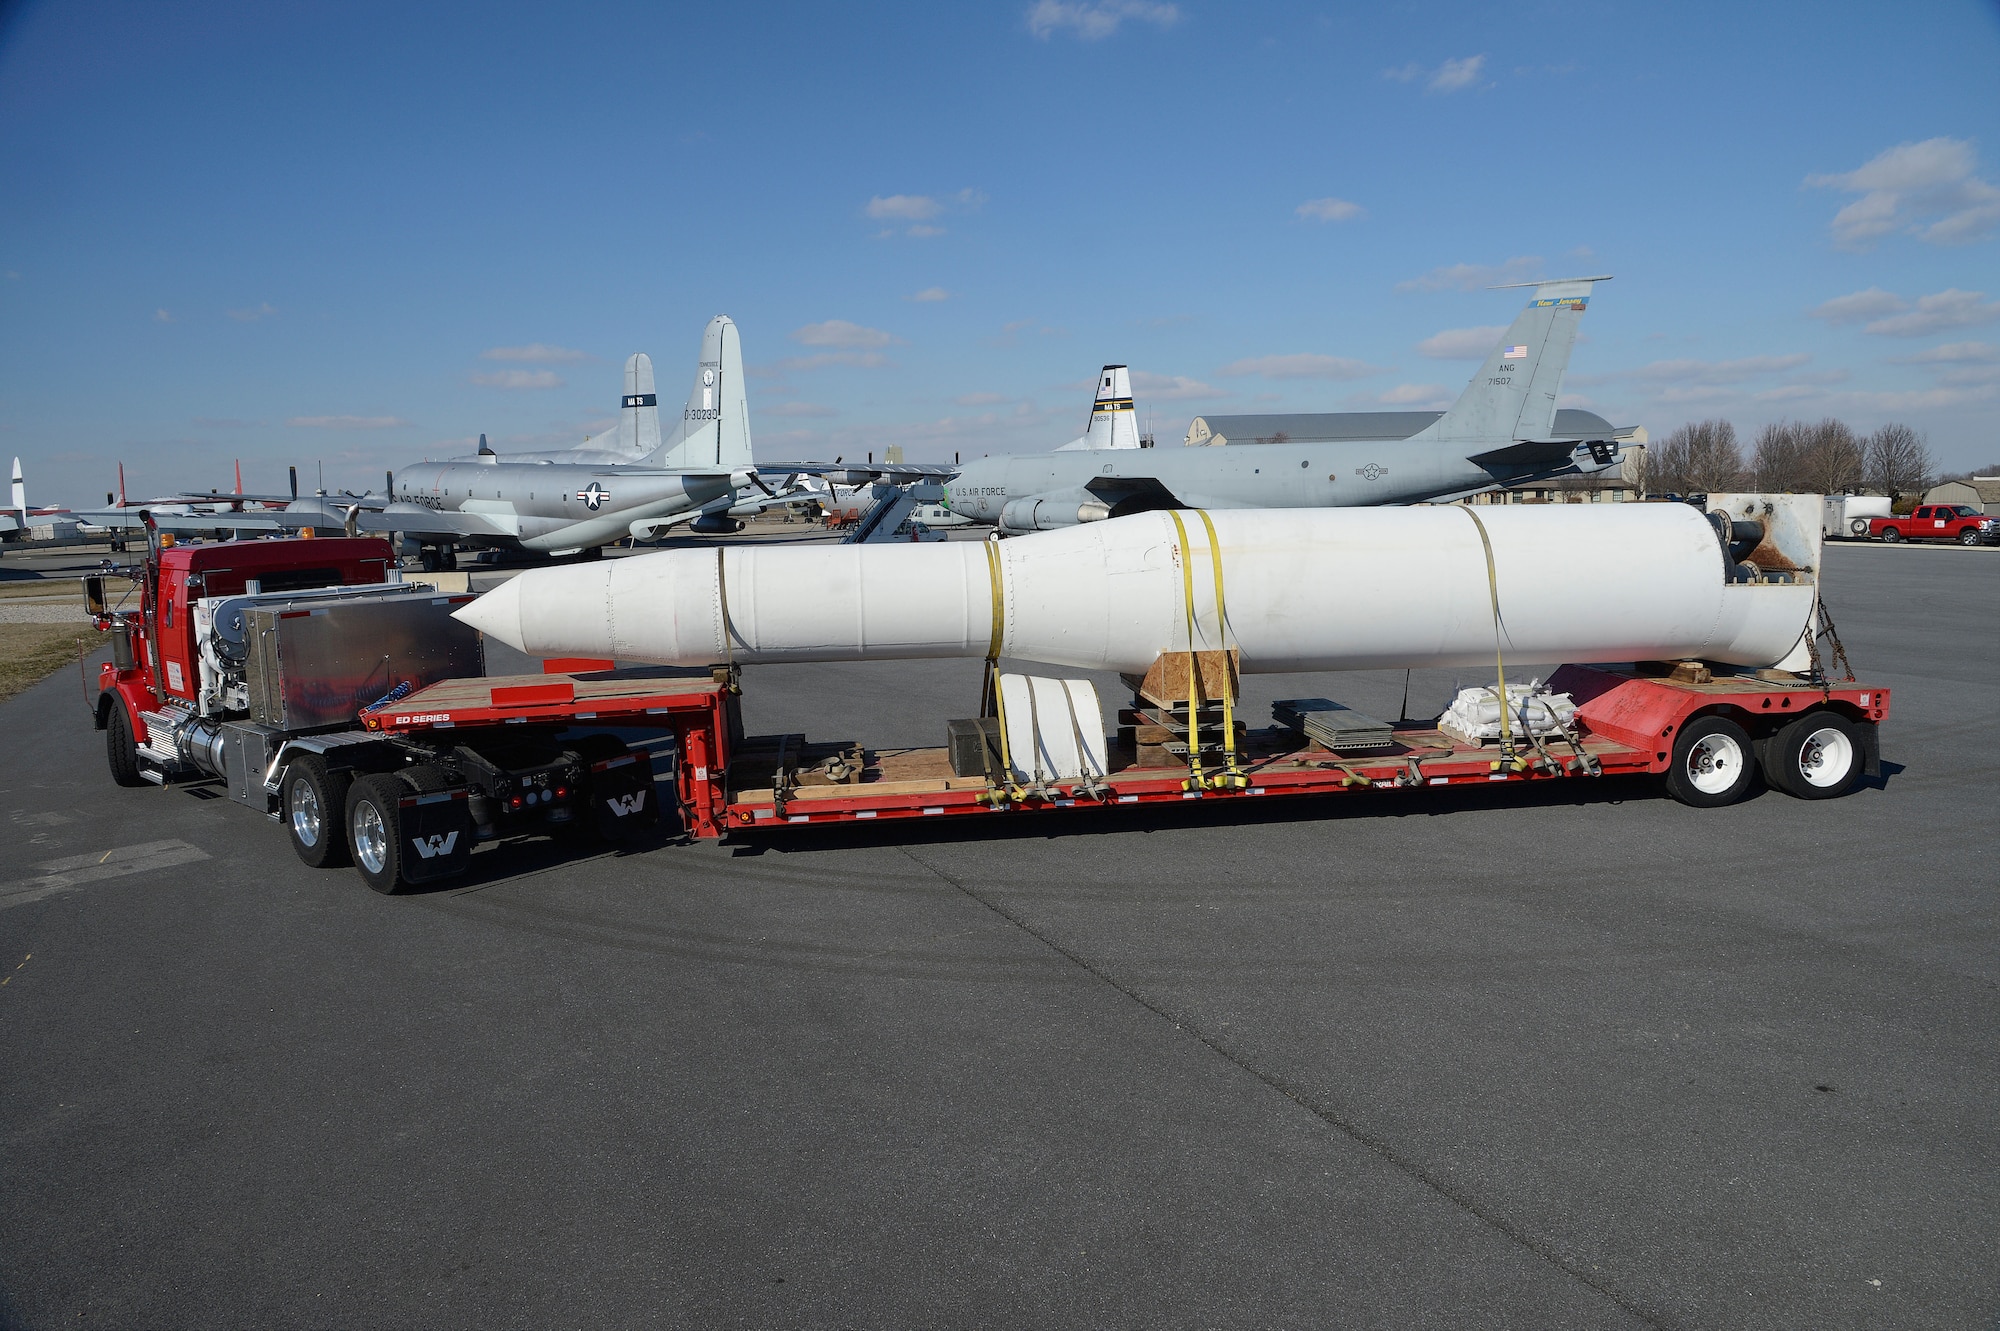 A Minuteman Intercontinental Ballistic Missile (ICBM) is delivered to the Air Mobility Command museum at Dover Air Force Base, Del. on Jan. 23rd, 2013. The inert ICBM has been moved here from its previous display location to help showcase one of the famous missions flown by the C-5A Galaxy. During this famous mission conducted on Oct. 24, 1974, C-5A serial #69-0014 air-dropped an ICMB missile at altitude which successfully fired after stabilizing during a feasibility test program. The ICBM will be restored and displayed next to C-5A 69-0014 in the near future. The museum is scheduled to receive C-5A 69-0014 in March 2013. USAF photo/Greg L. Davis 